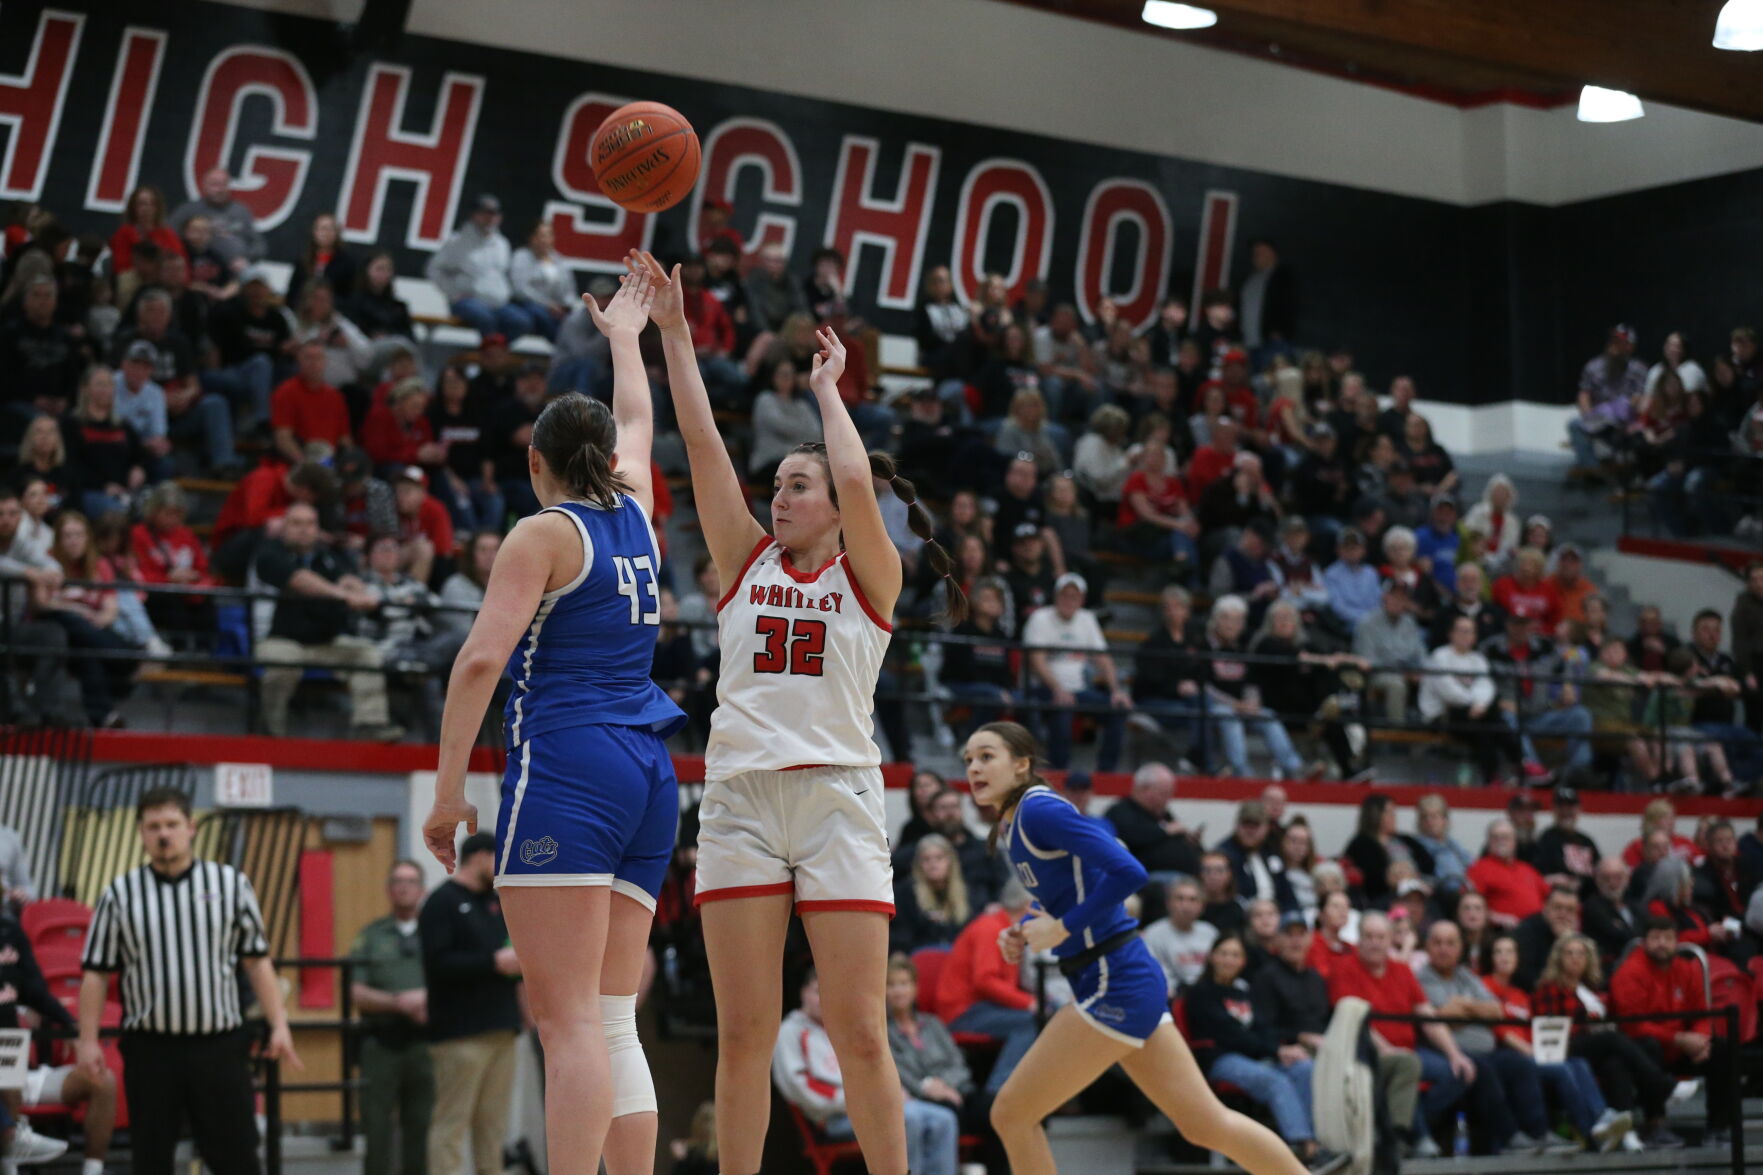 Bell County dominates Whitley County 60-48: Maddy Hopkins leads with 24 points